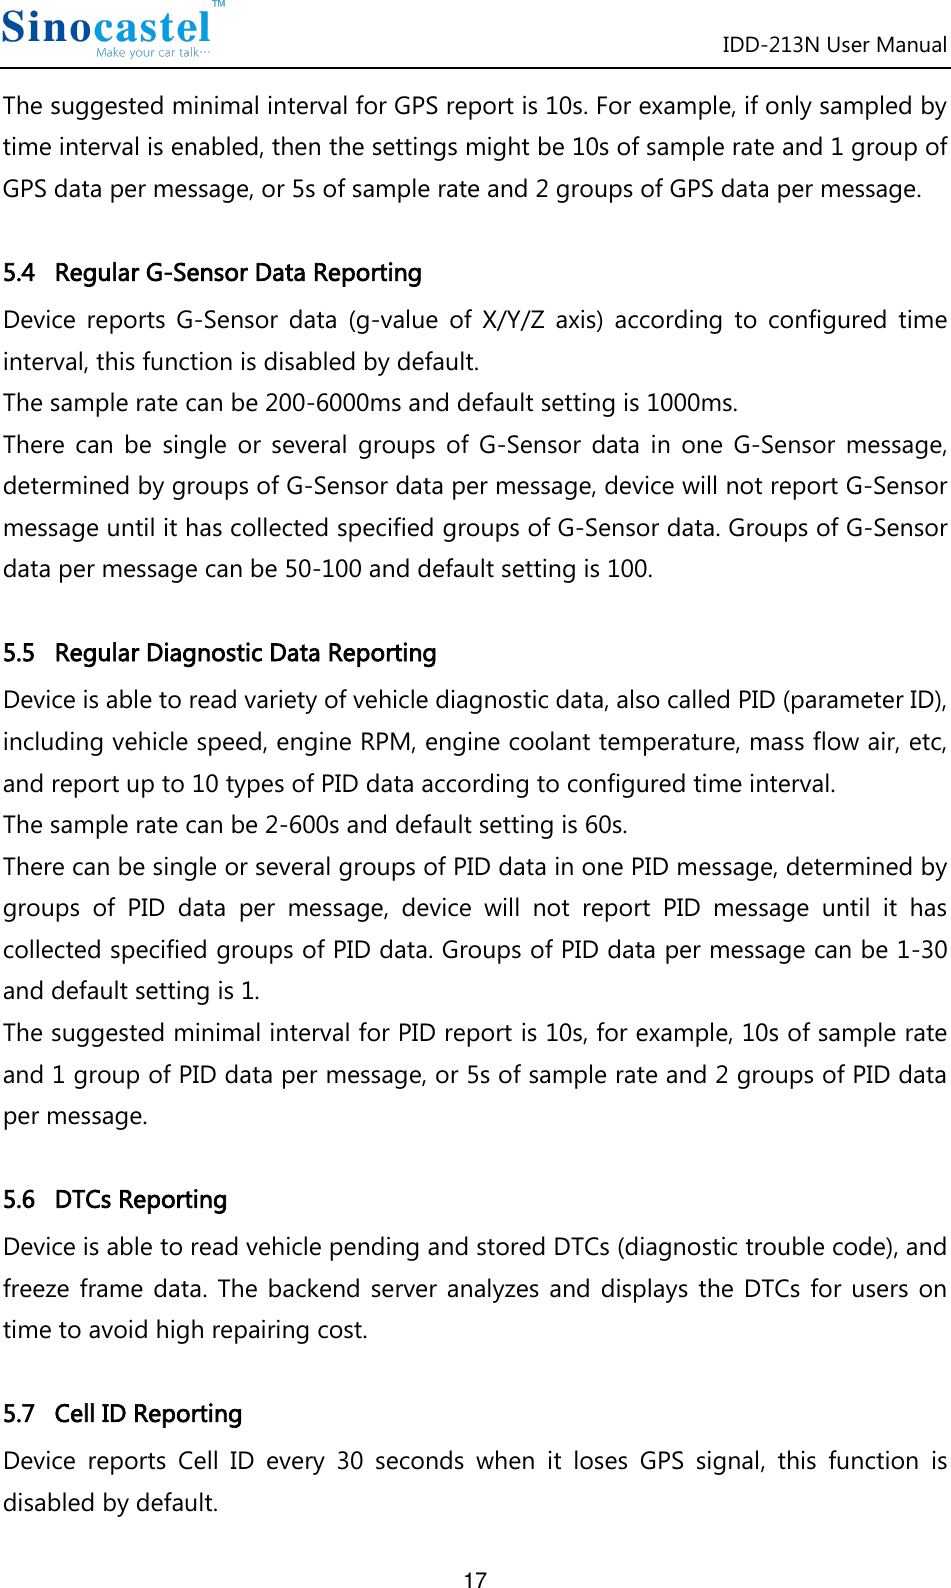 IDD-213N User Manual 17 The suggested minimal interval for GPS report is 10s. For example, if only sampled by time interval is enabled, then the settings might be 10s of sample rate and 1 group of GPS data per message, or 5s of sample rate and 2 groups of GPS data per message.  5.4   Regular G-Sensor Data Reporting Device  reports  G-Sensor  data  (g-value  of  X/Y/Z  axis)  according  to  configured  time interval, this function is disabled by default. The sample rate can be 200-6000ms and default setting is 1000ms. There  can  be  single  or  several  groups  of  G-Sensor  data  in  one  G-Sensor  message, determined by groups of G-Sensor data per message, device will not report G-Sensor message until it has collected specified groups of G-Sensor data. Groups of G-Sensor data per message can be 50-100 and default setting is 100.  5.5   Regular Diagnostic Data Reporting Device is able to read variety of vehicle diagnostic data, also called PID (parameter ID), including vehicle speed, engine RPM, engine coolant temperature, mass flow air, etc, and report up to 10 types of PID data according to configured time interval.   The sample rate can be 2-600s and default setting is 60s. There can be single or several groups of PID data in one PID message, determined by groups  of  PID  data  per  message,  device  will  not  report  PID  message  until  it  has collected specified groups of PID data. Groups of PID data per message can be 1-30 and default setting is 1. The suggested minimal interval for PID report is 10s, for example, 10s of sample rate and 1 group of PID data per message, or 5s of sample rate and 2 groups of PID data per message.  5.6   DTCs Reporting Device is able to read vehicle pending and stored DTCs (diagnostic trouble code), and freeze frame  data.  The backend server analyzes and  displays  the  DTCs  for users  on time to avoid high repairing cost.  5.7   Cell ID Reporting Device  reports  Cell  ID  every  30  seconds  when  it  loses  GPS  signal,  this  function  is disabled by default. 